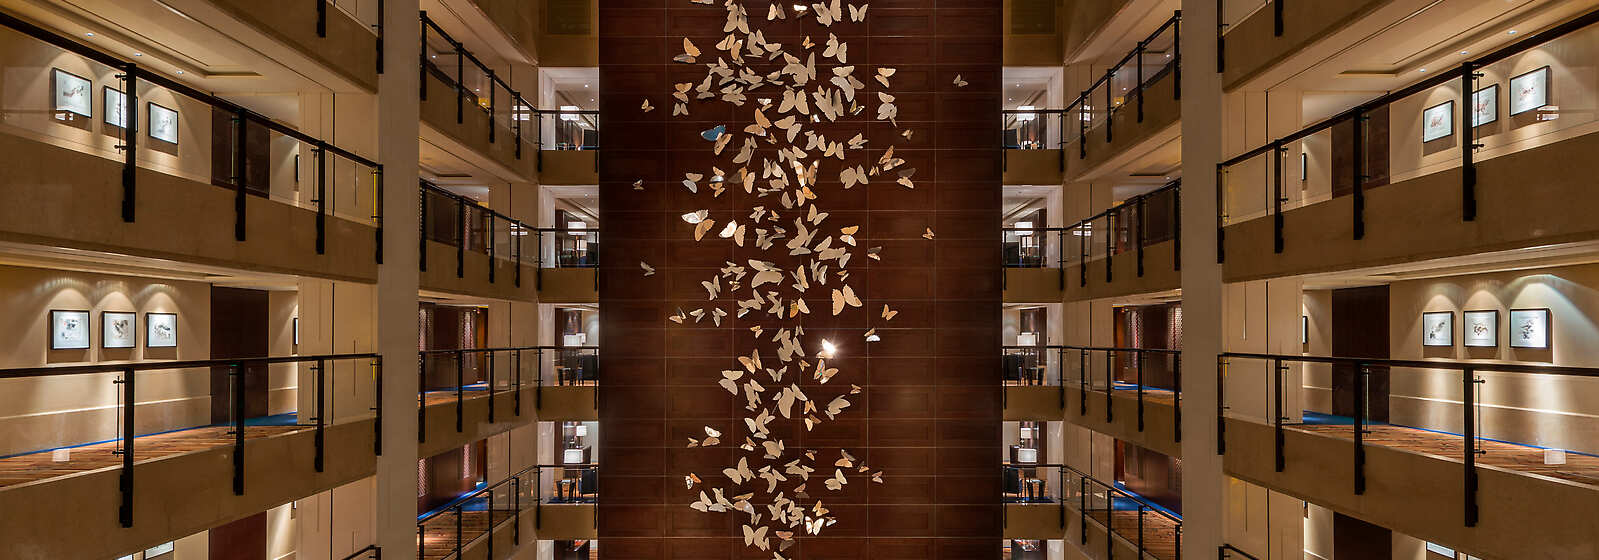 Signature Butterfly Wall